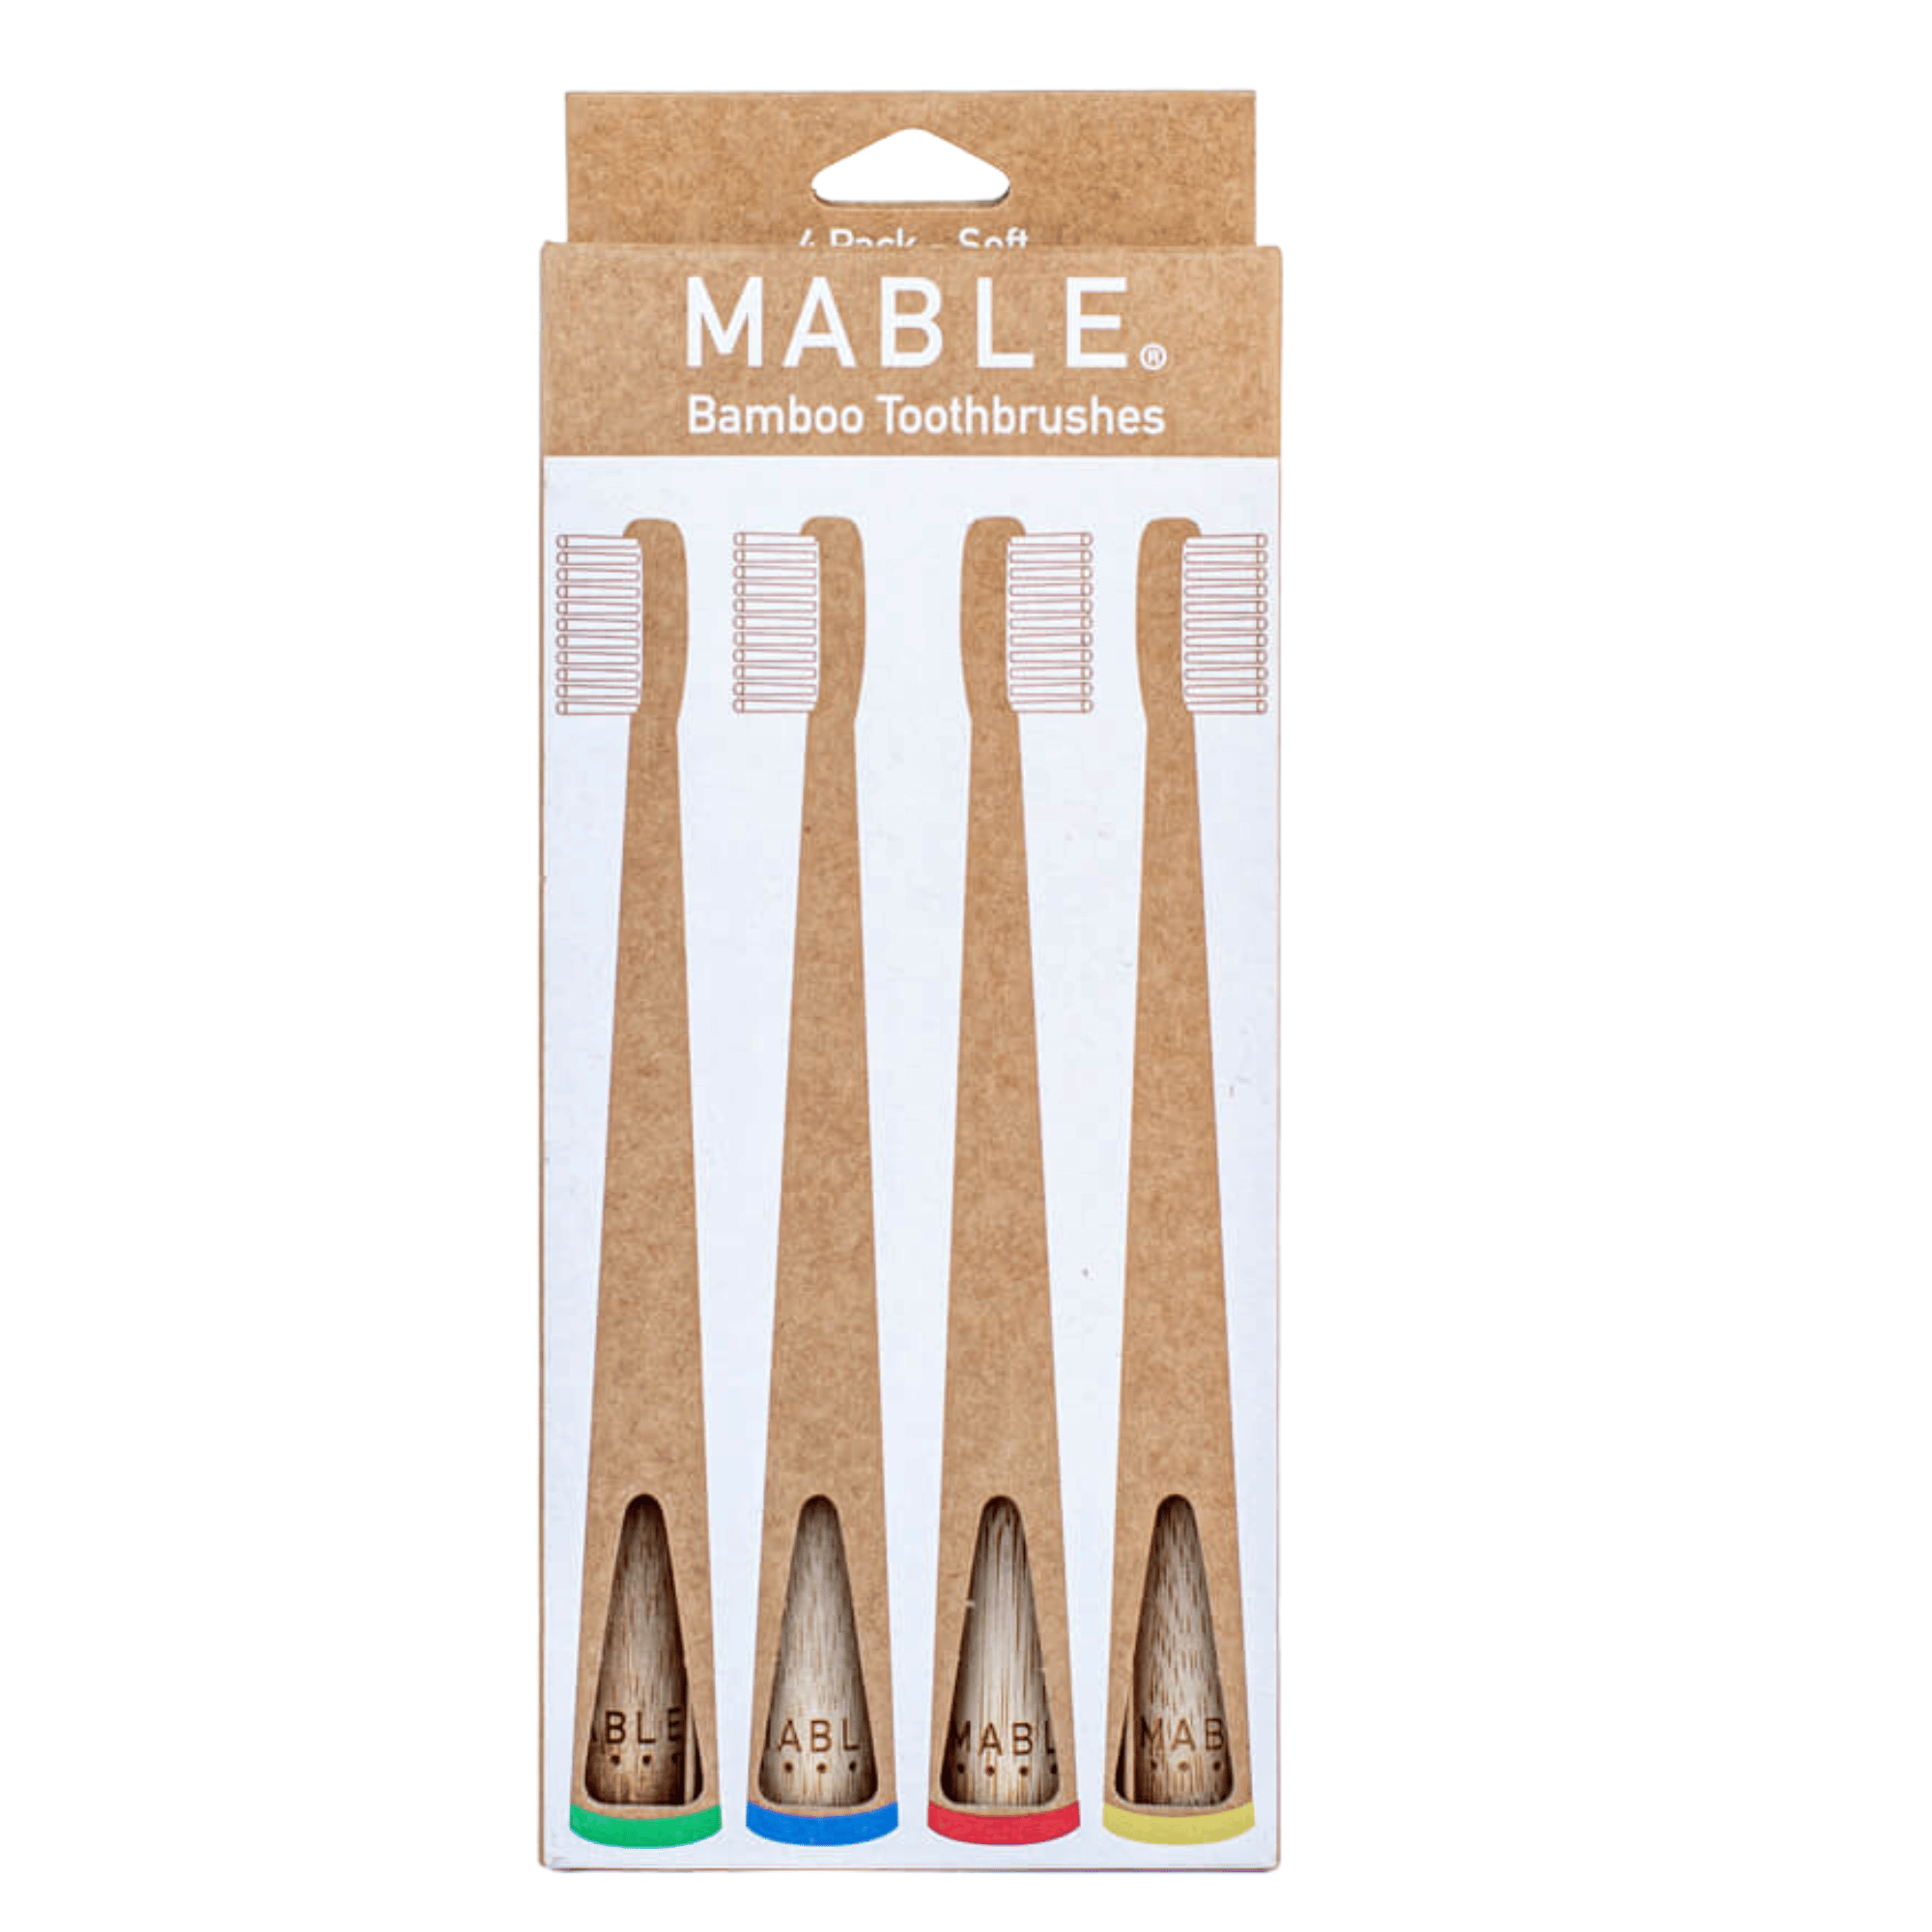 MABLE® Four Pack bamboo toothbrushes: Contain four of our ergonomic, self-standing bamboo toothbrushes. Four packs available in adult and kids size: Get a pack of bamboo toothbrushes for Kids: they're naturally anti-bacterial and water resistant. The handles are 100% compostable and certified by the USDA as 100% biobased. Made from sustainably harvested bamboo certified by the FSC.